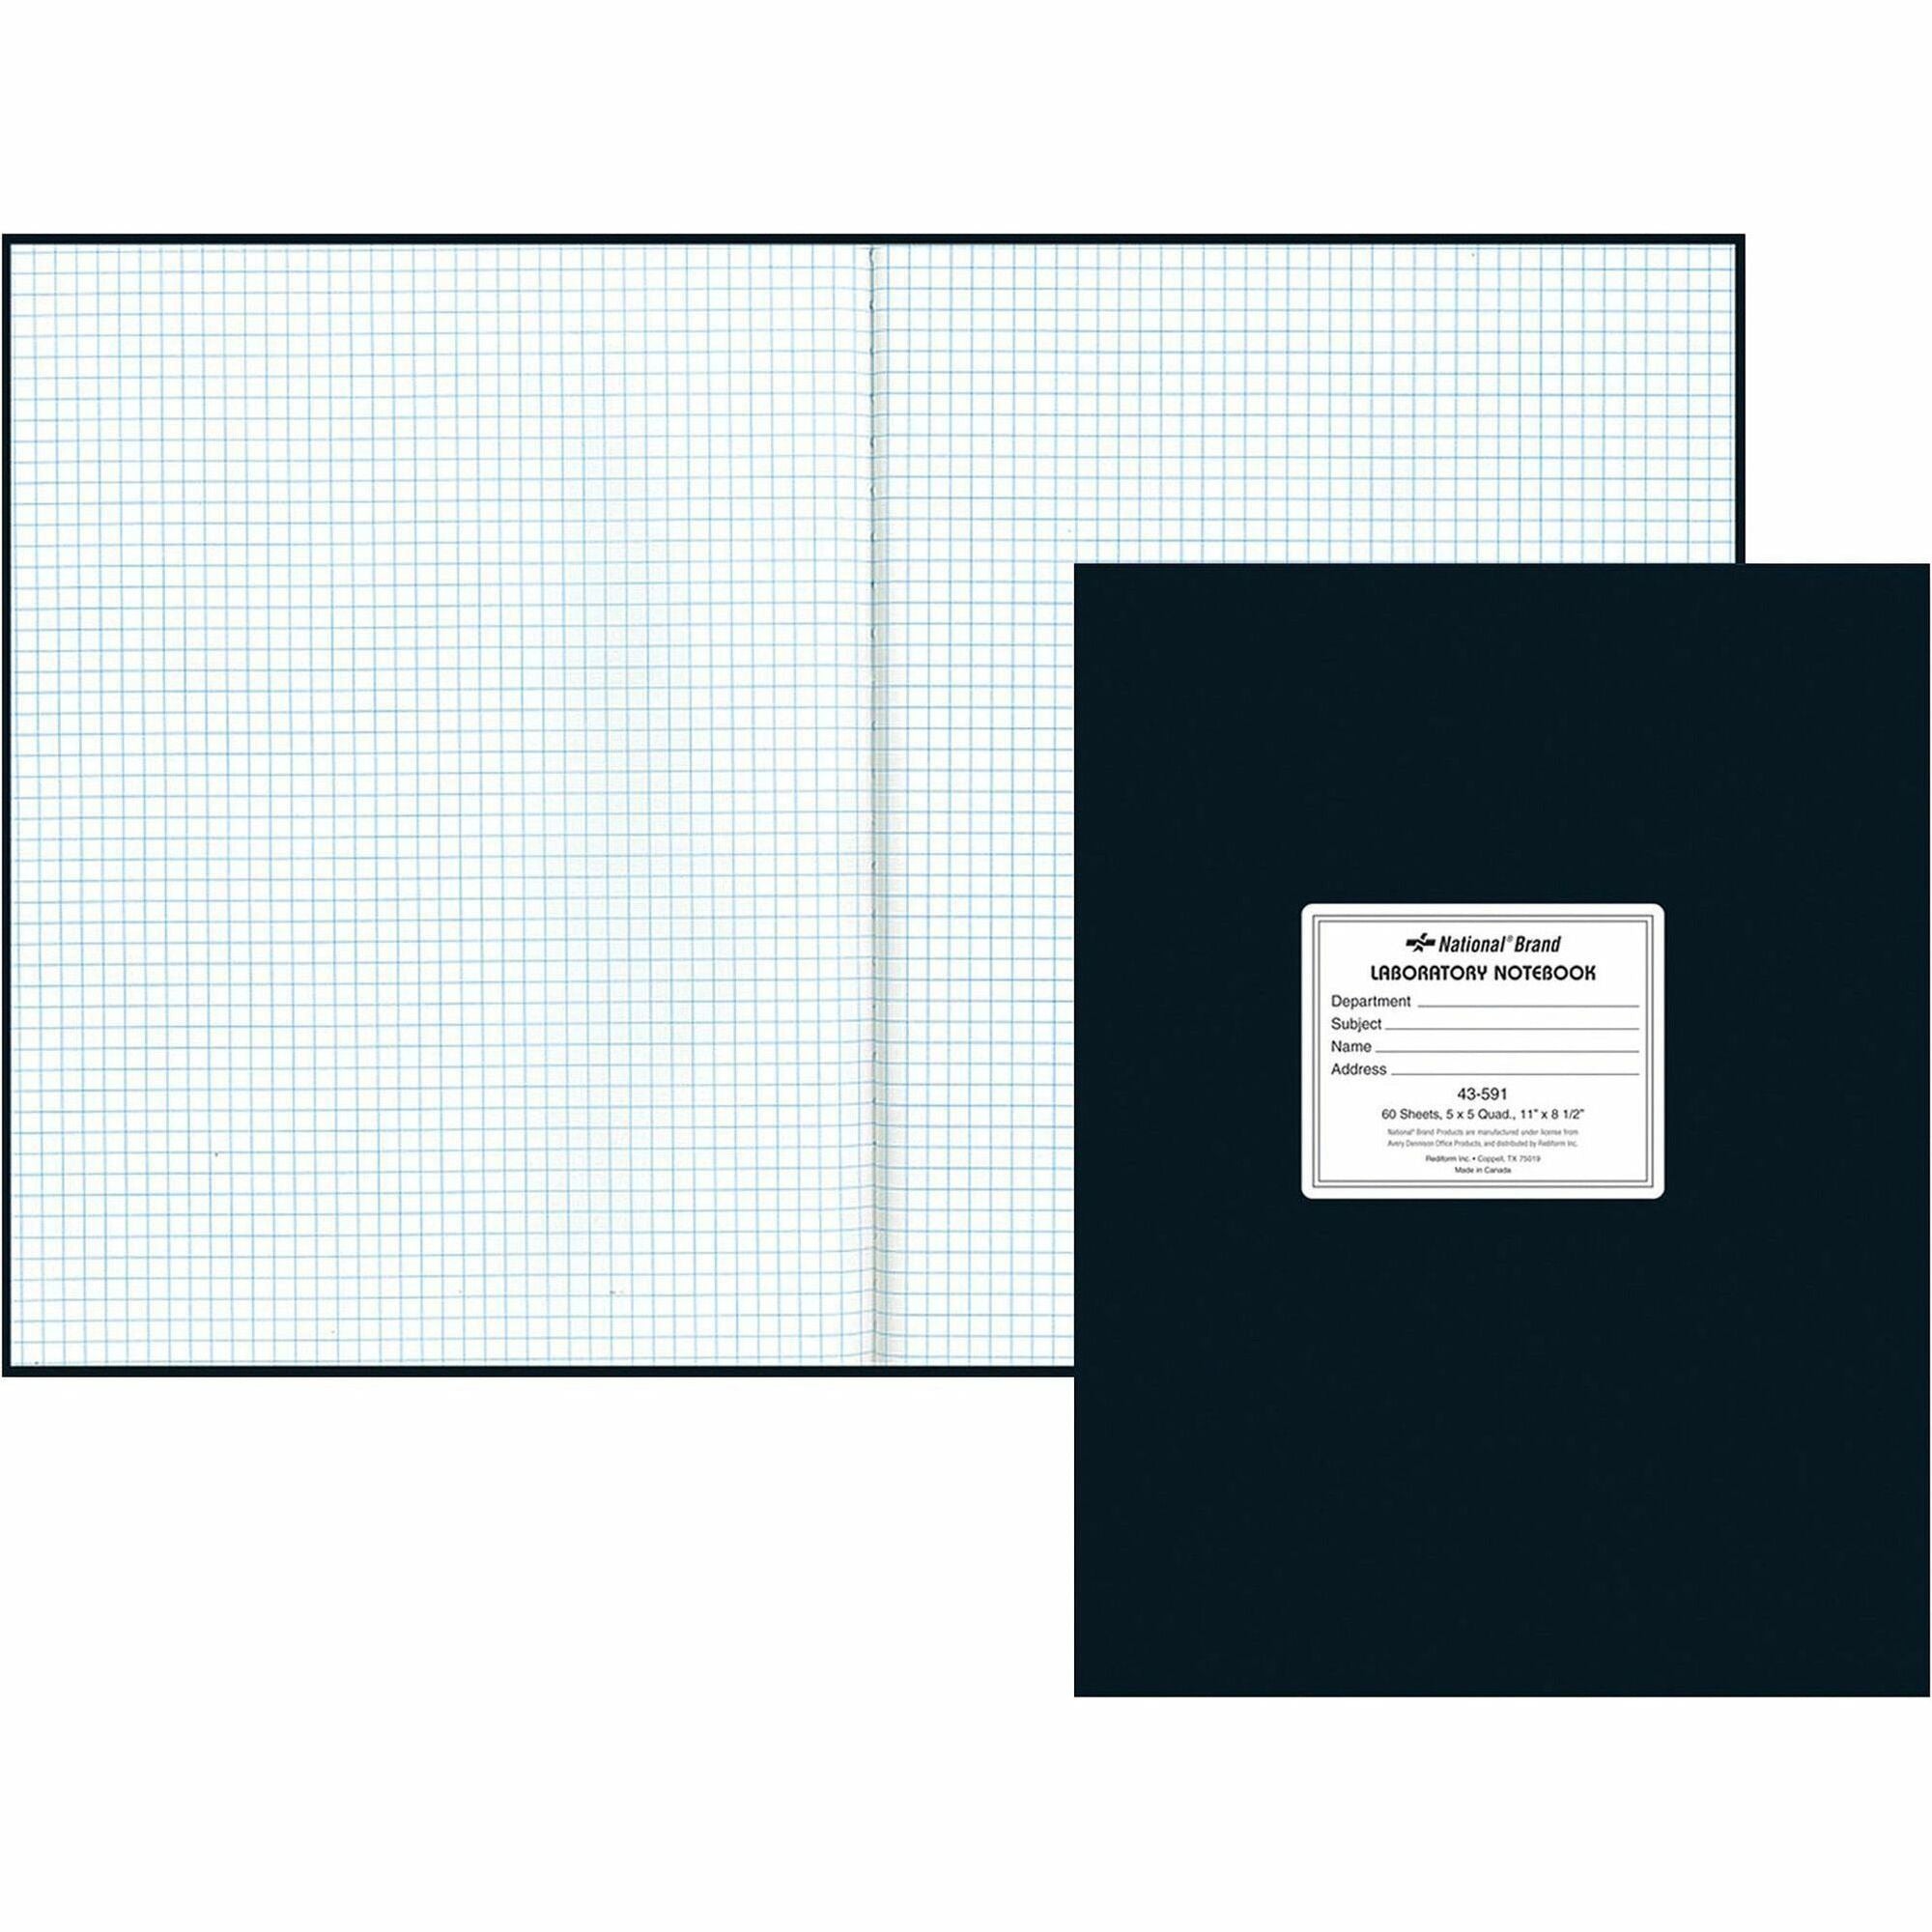 Rediform Quad Ruled Laboratory Notebook - 60 Sheets - 8 1/2" x 11" - White Paper - Black Cover - Hard Cover, Heavyweight - Recycled - 1 Each - 